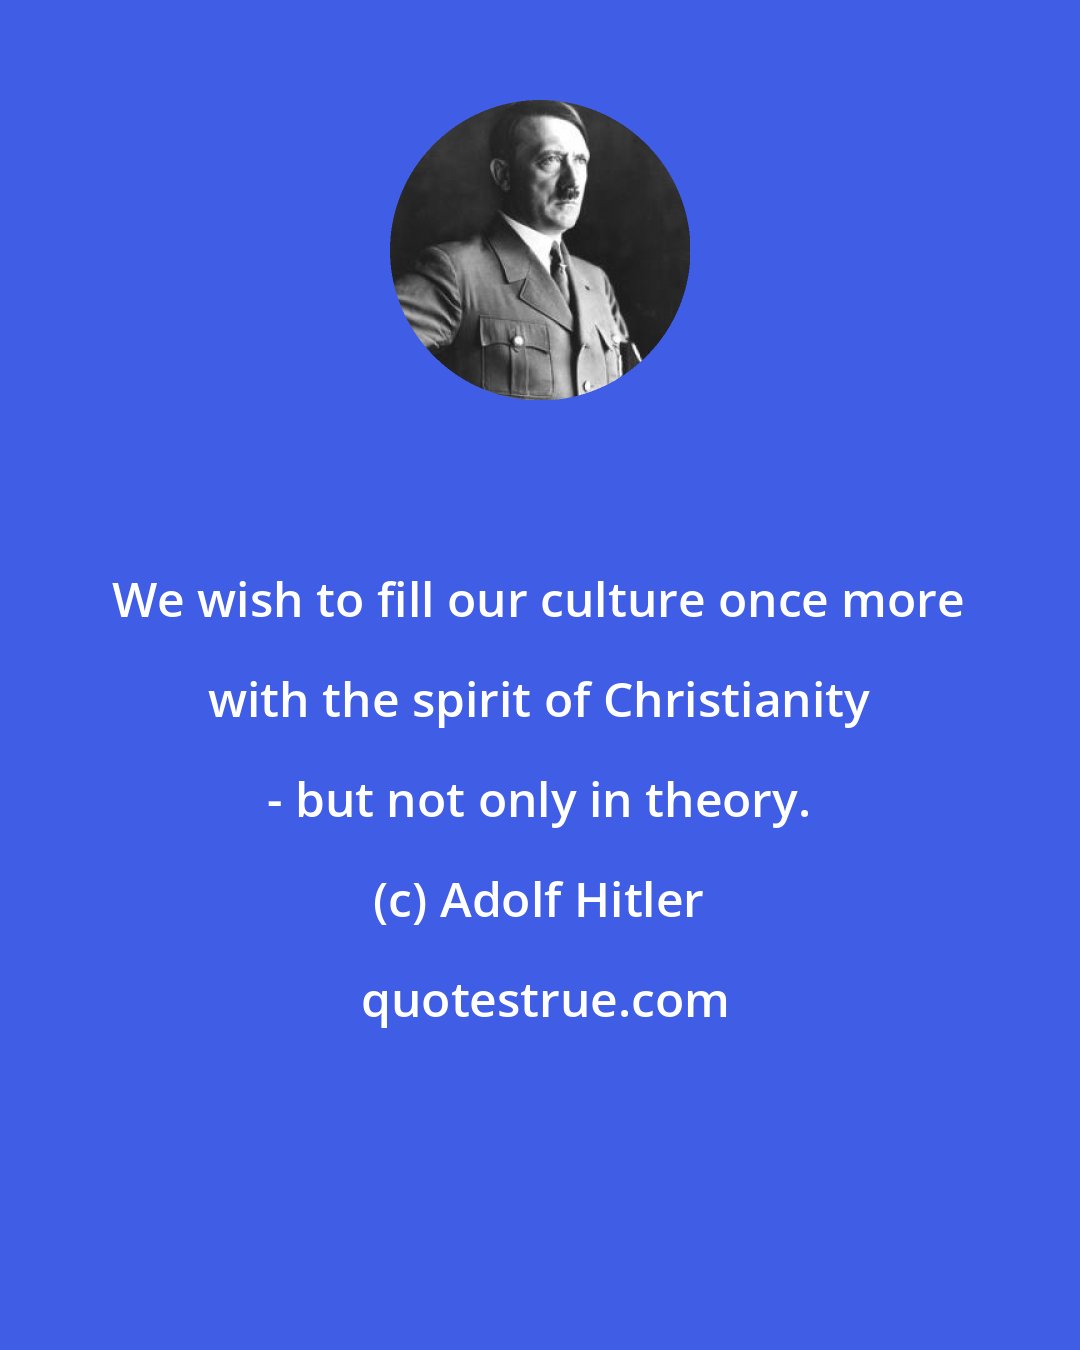 Adolf Hitler: We wish to fill our culture once more with the spirit of Christianity - but not only in theory.